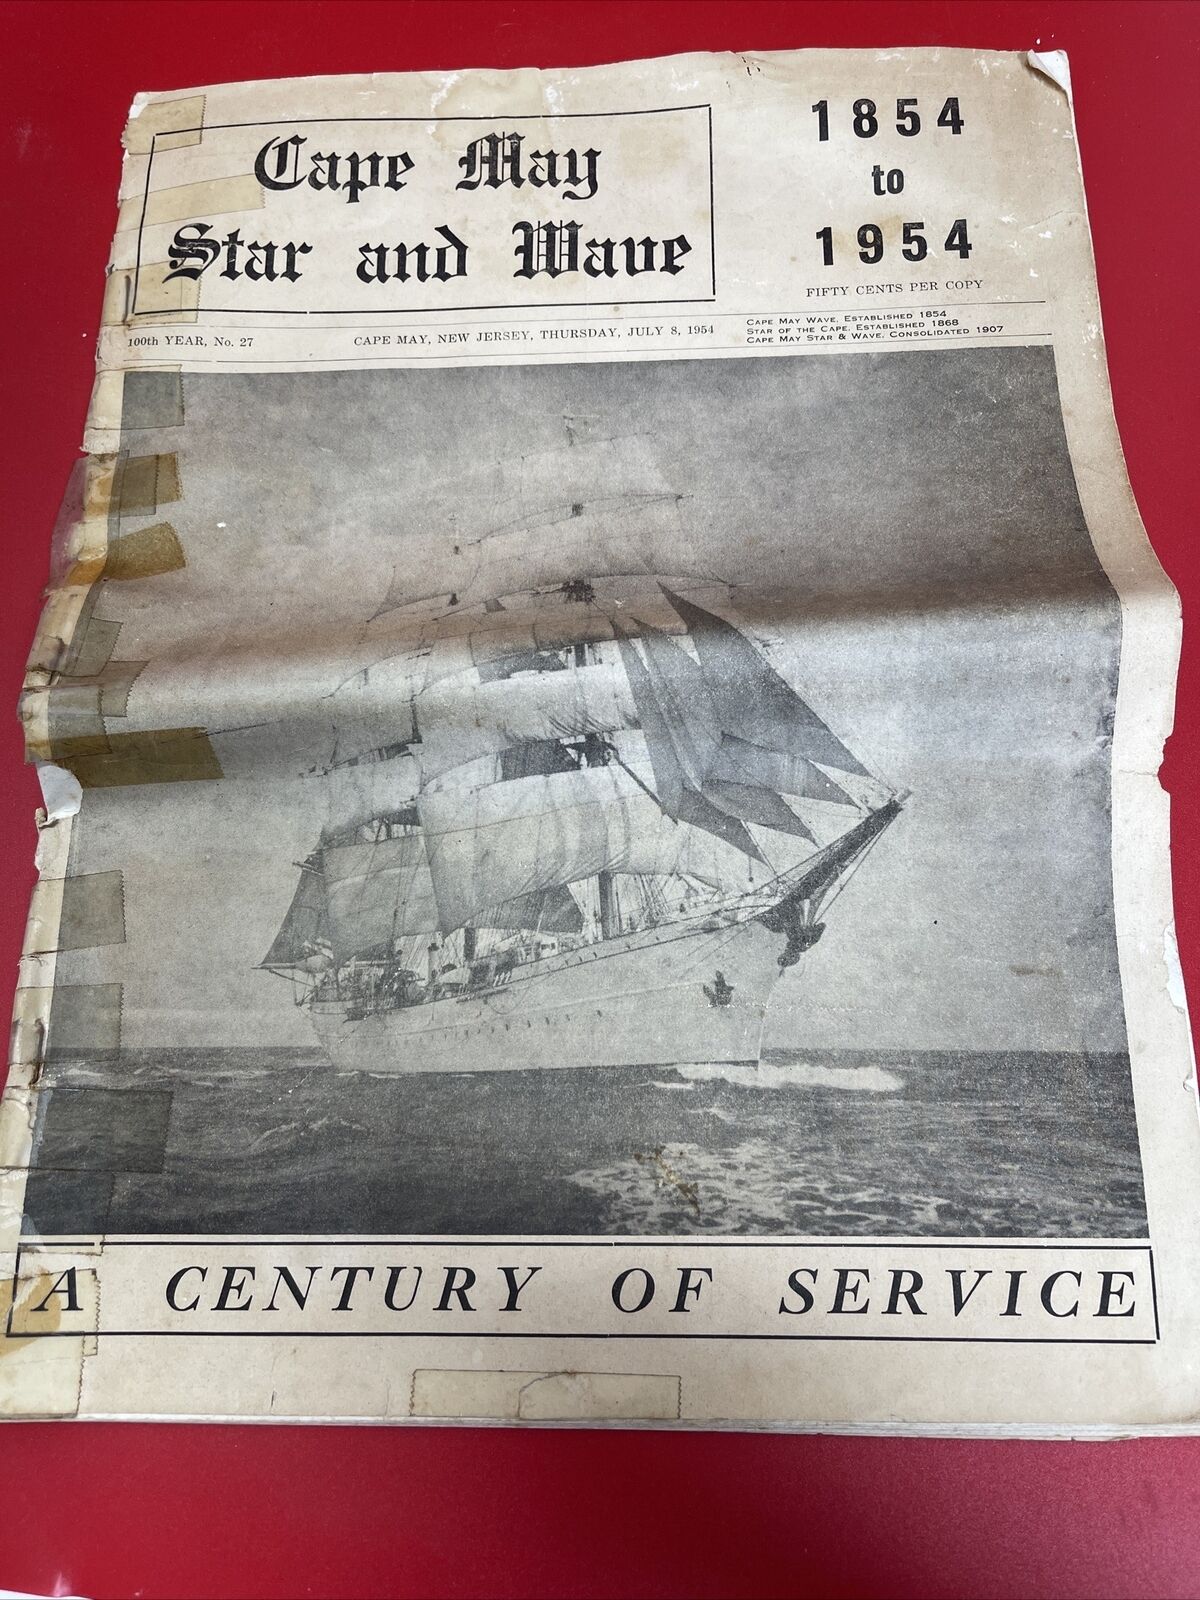 CAPE MAY STAR AND WAVE July 8 ,1954